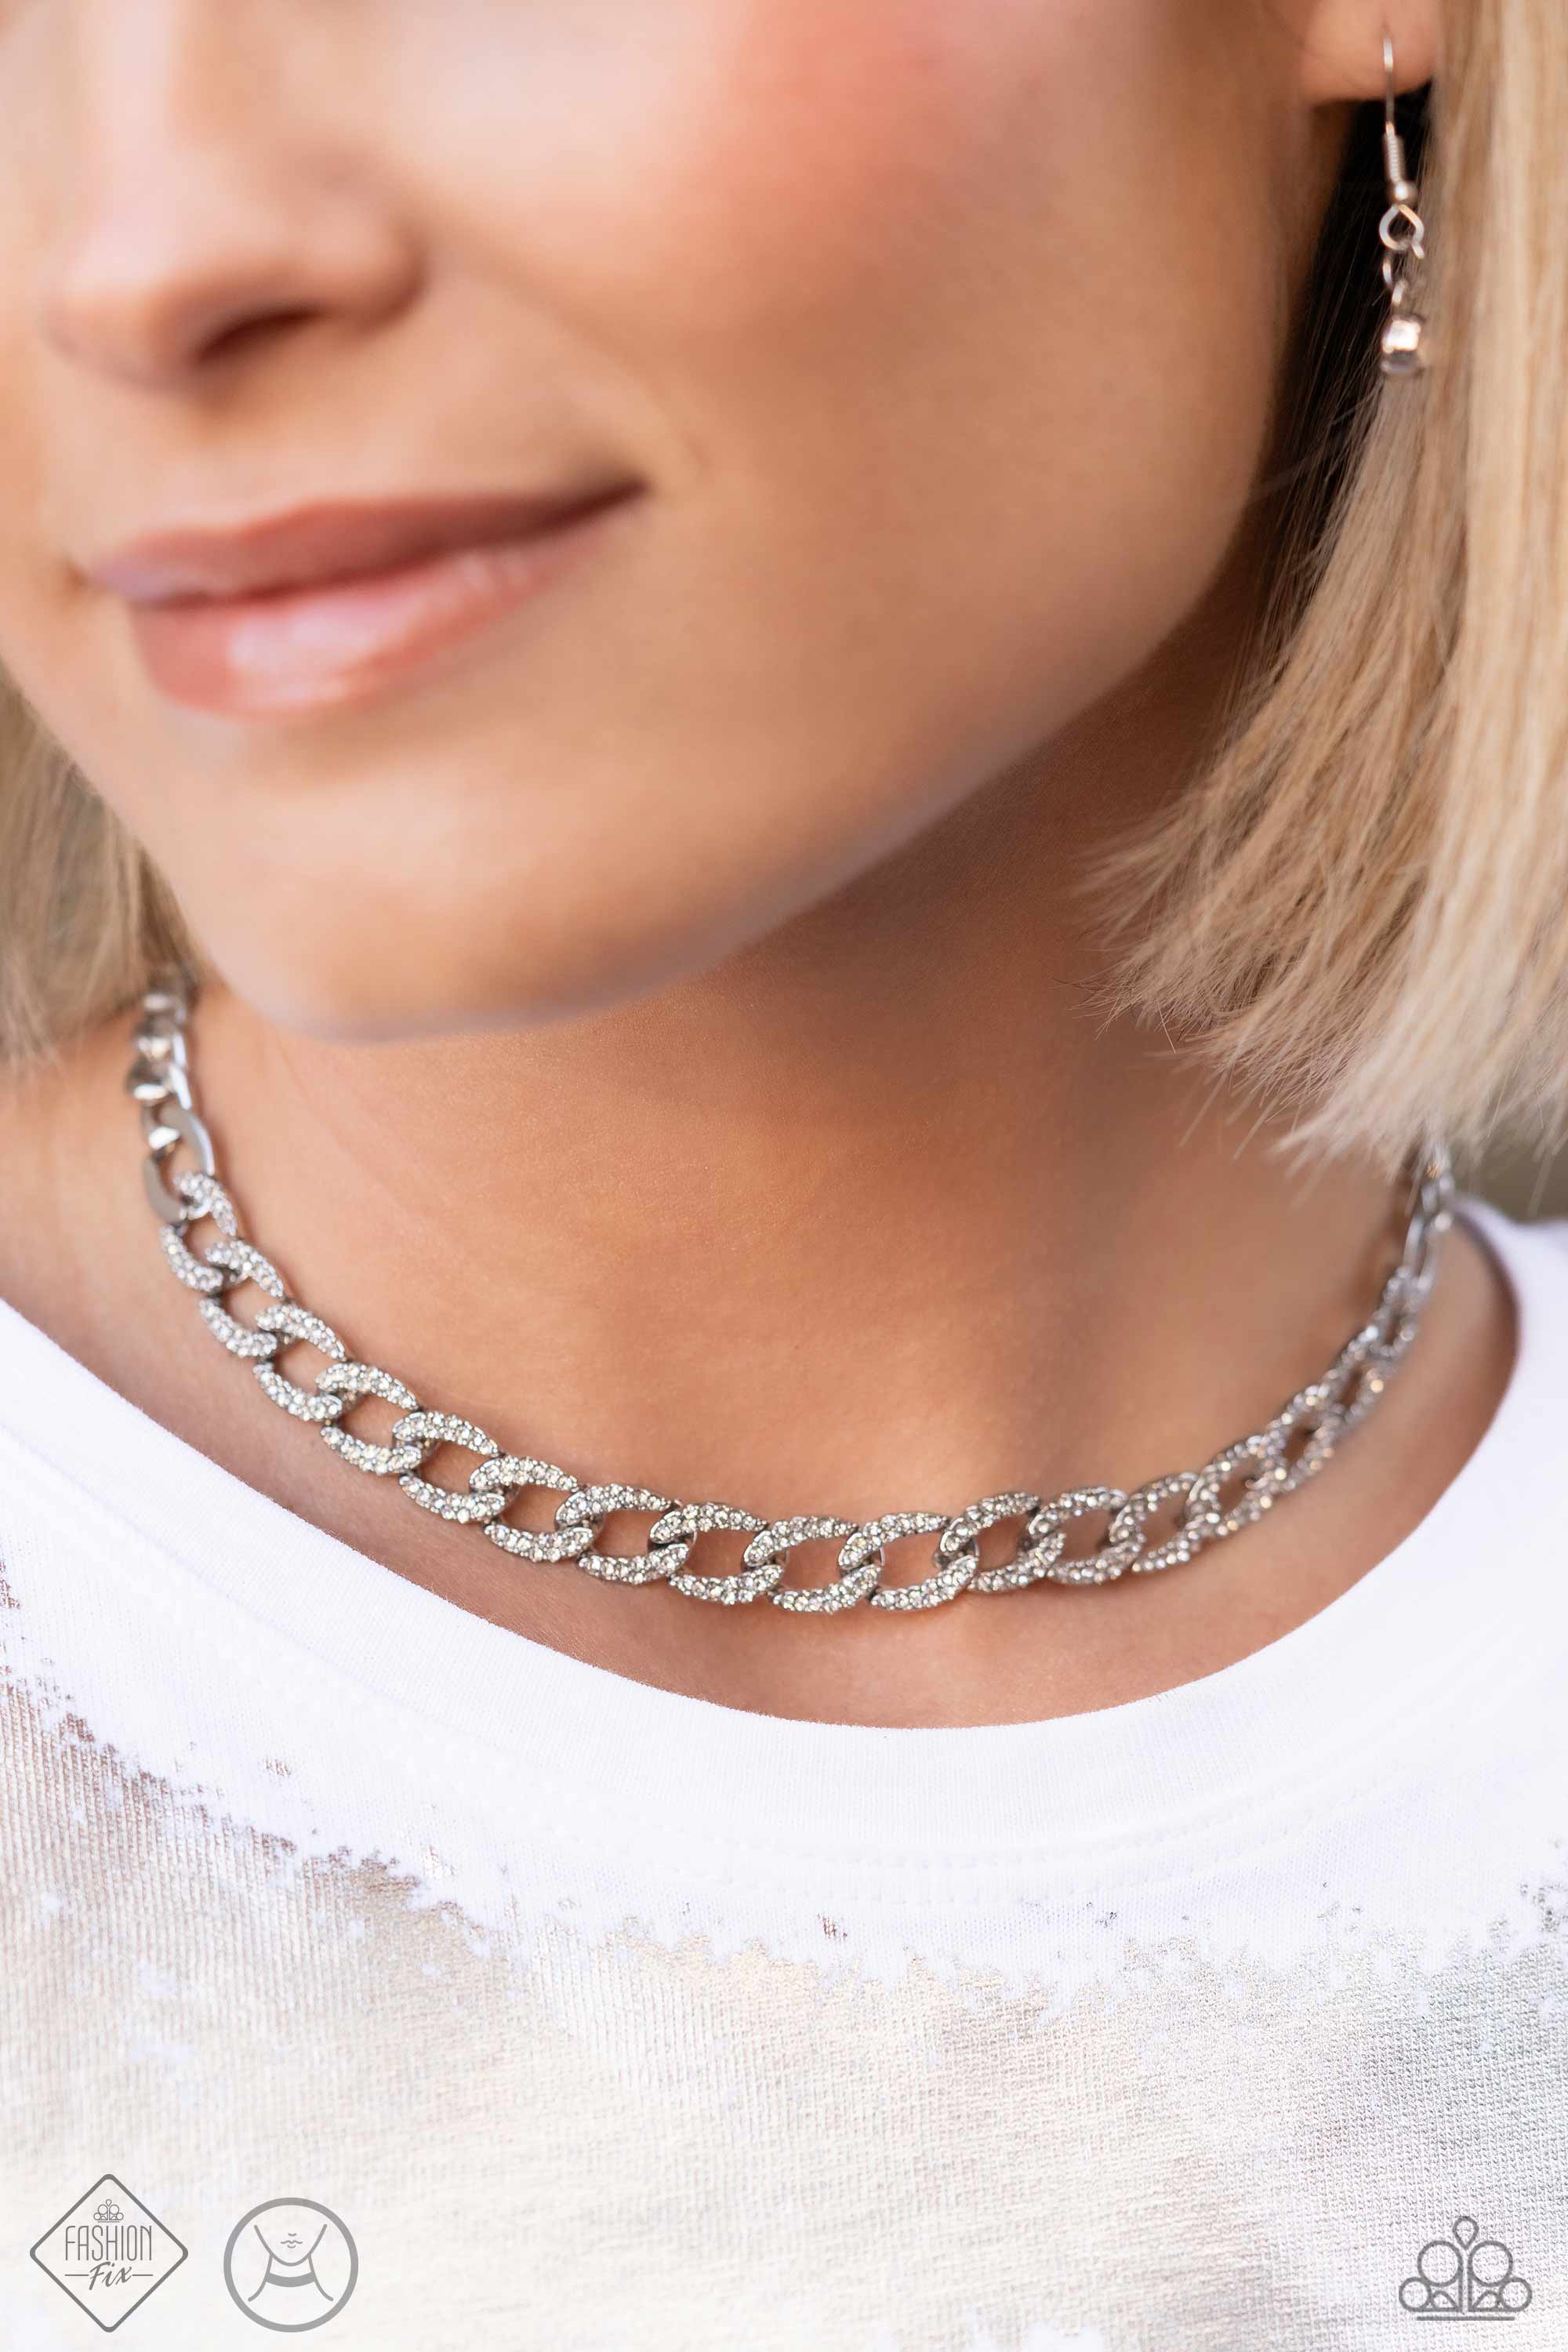 Fiercely Independent White Rhinestone Choker Necklace - Paparazzi Accessories- lightbox - CarasShop.com - $5 Jewelry by Cara Jewels